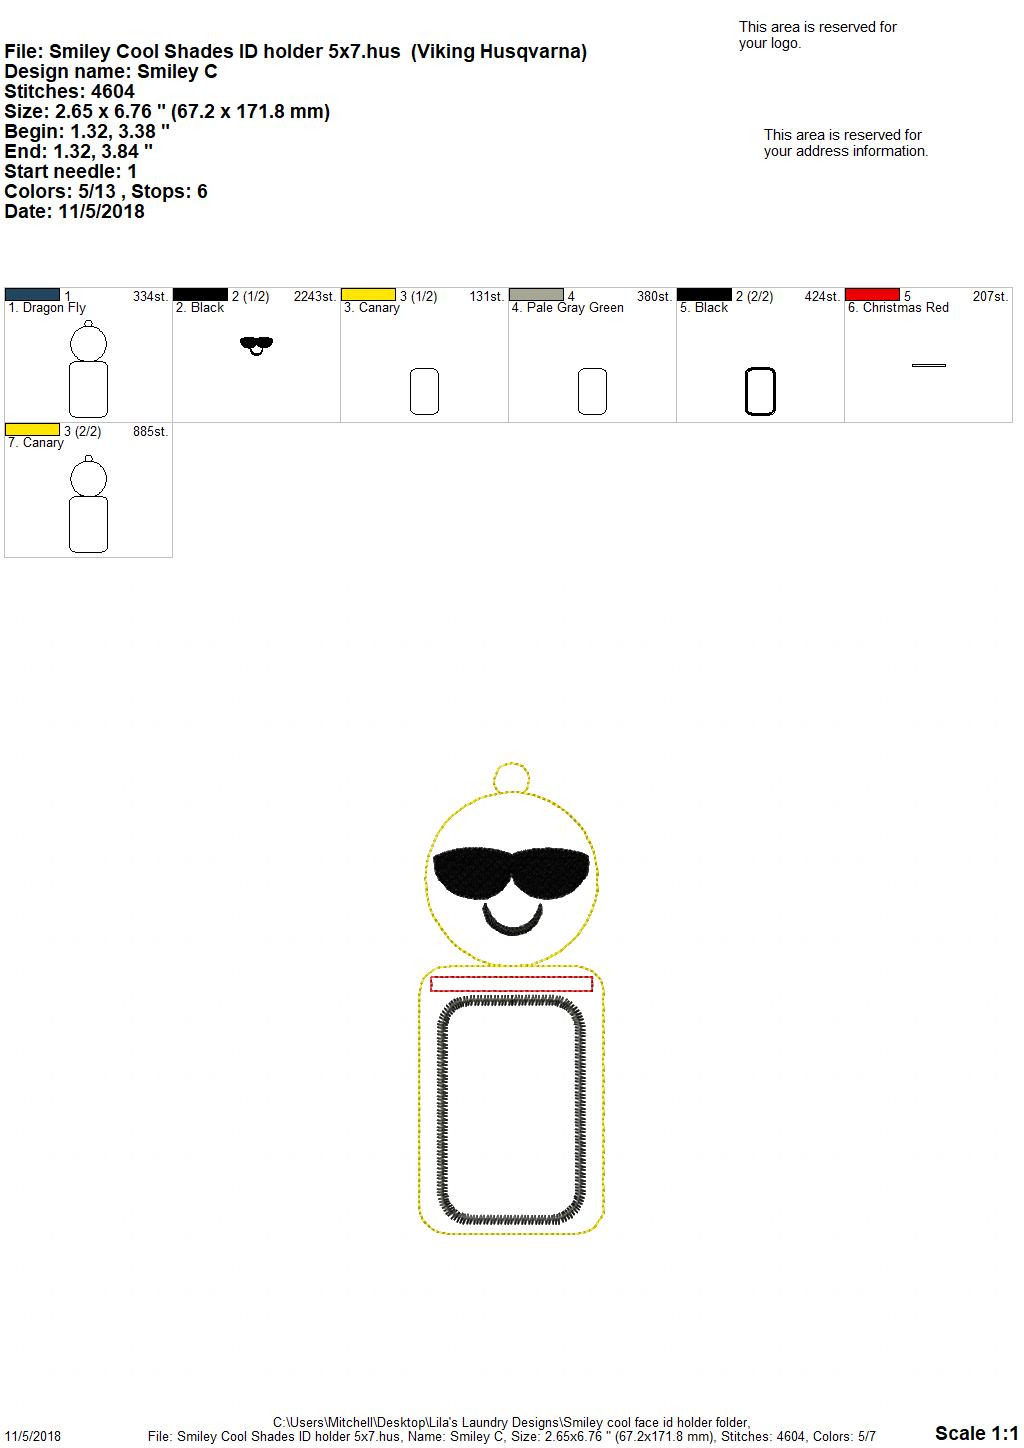 Smiley Cool Shades ID holder - Embroidery Design - DIGITAL Embroidery design